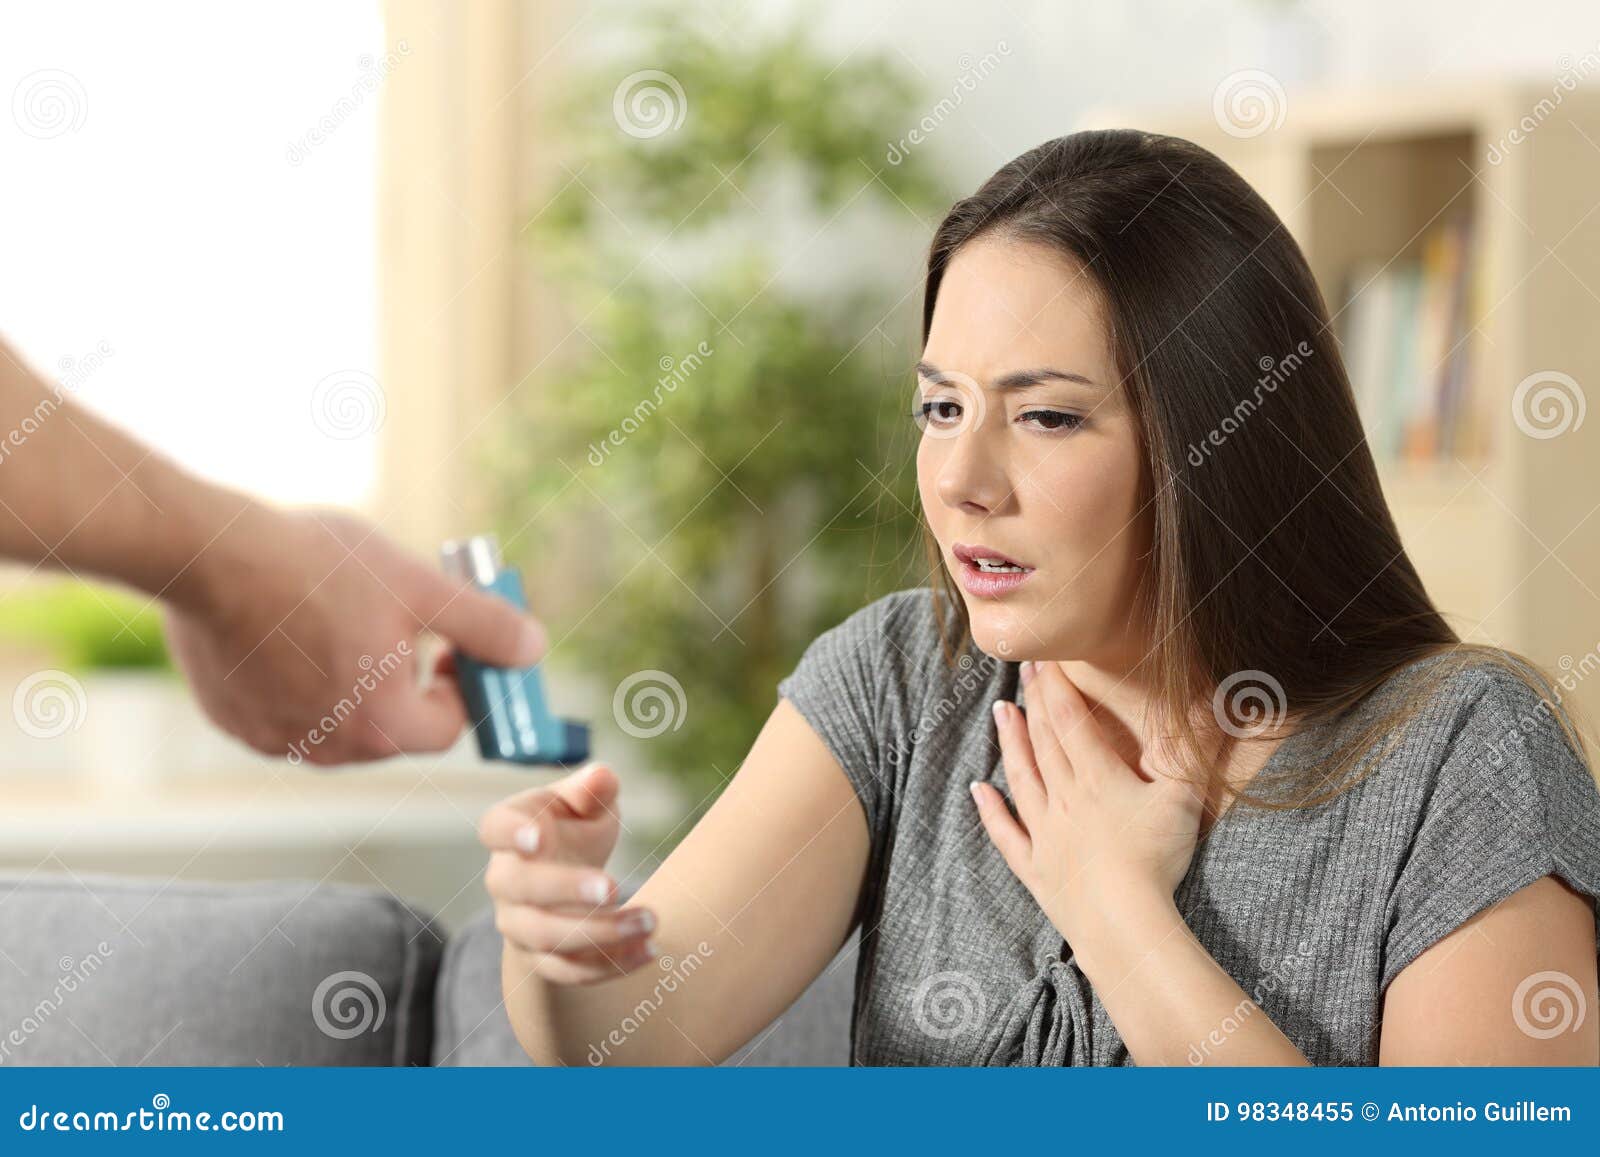 asthmatic girl suffering an attack and receiving inhaler